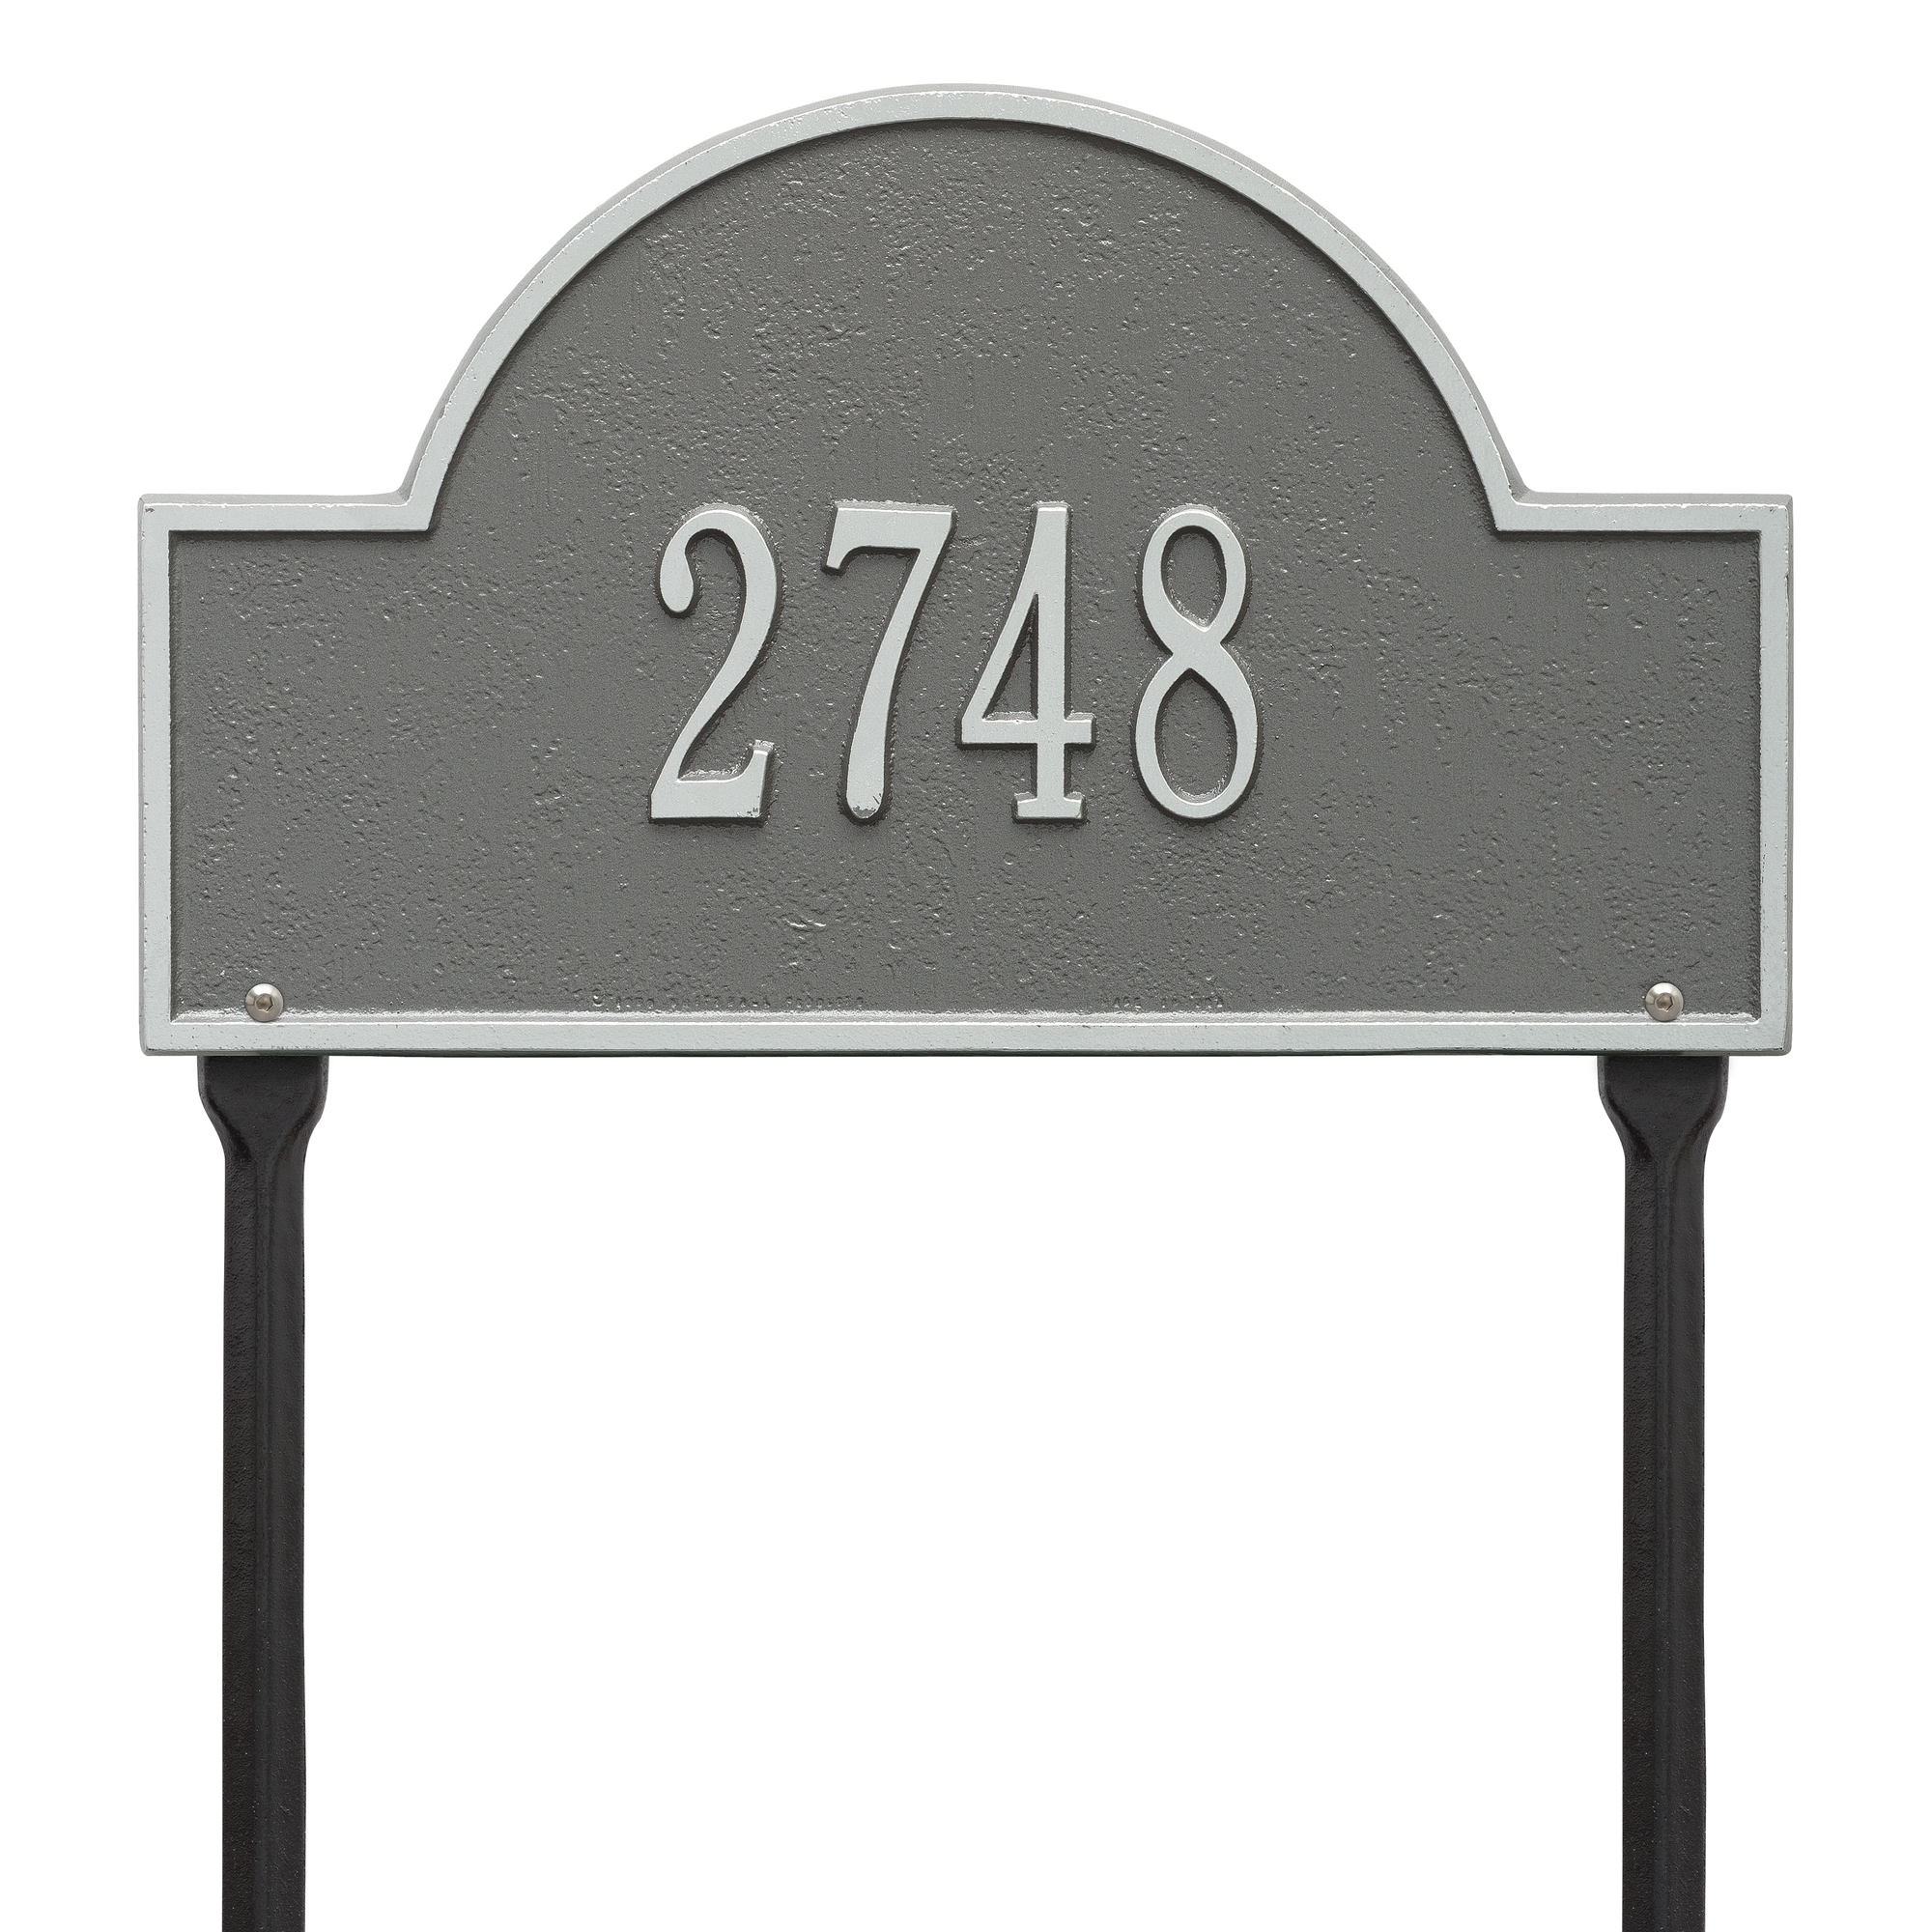 Personalized Whitehall Products 15-Inch Arch Marker Address Plaque in Pewter Silver - image 1 of 2